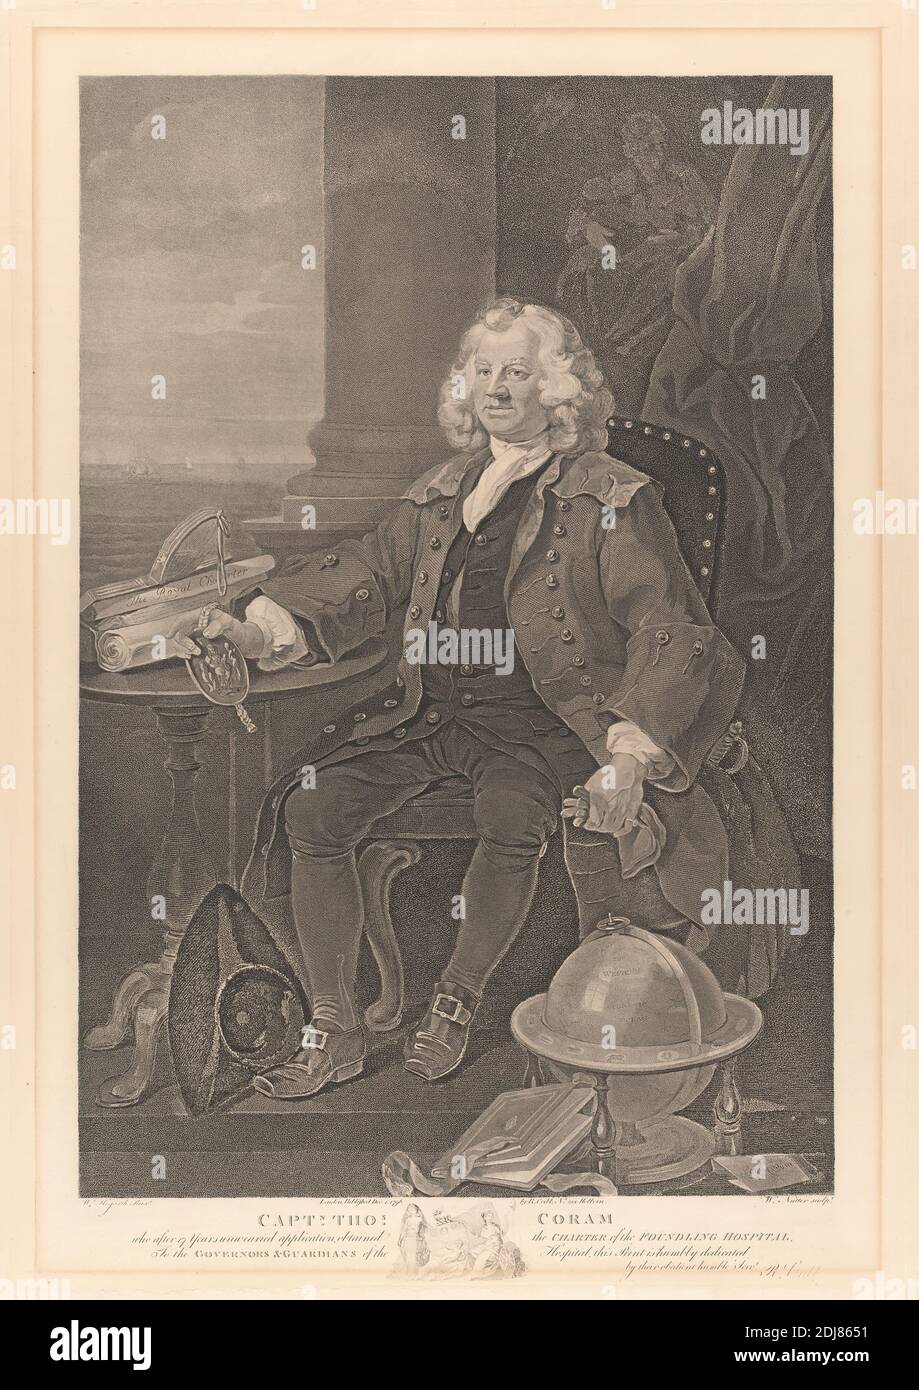 Captain Thomas Coram, William Nutter, 1754–1802, British, after William Hogarth, 1697–1764, British, 1796, Engraving on moderately thick, smooth, beige, wove paper, Sheet: 25 1/8 × 19 3/16 inches (63.8 × 48.7 cm), Plate: 22 7/8 × 16 inches (58.1 × 40.6 cm), and Image: 20 × 13 1/2 inches (50.8 × 34.3 cm Stock Photo